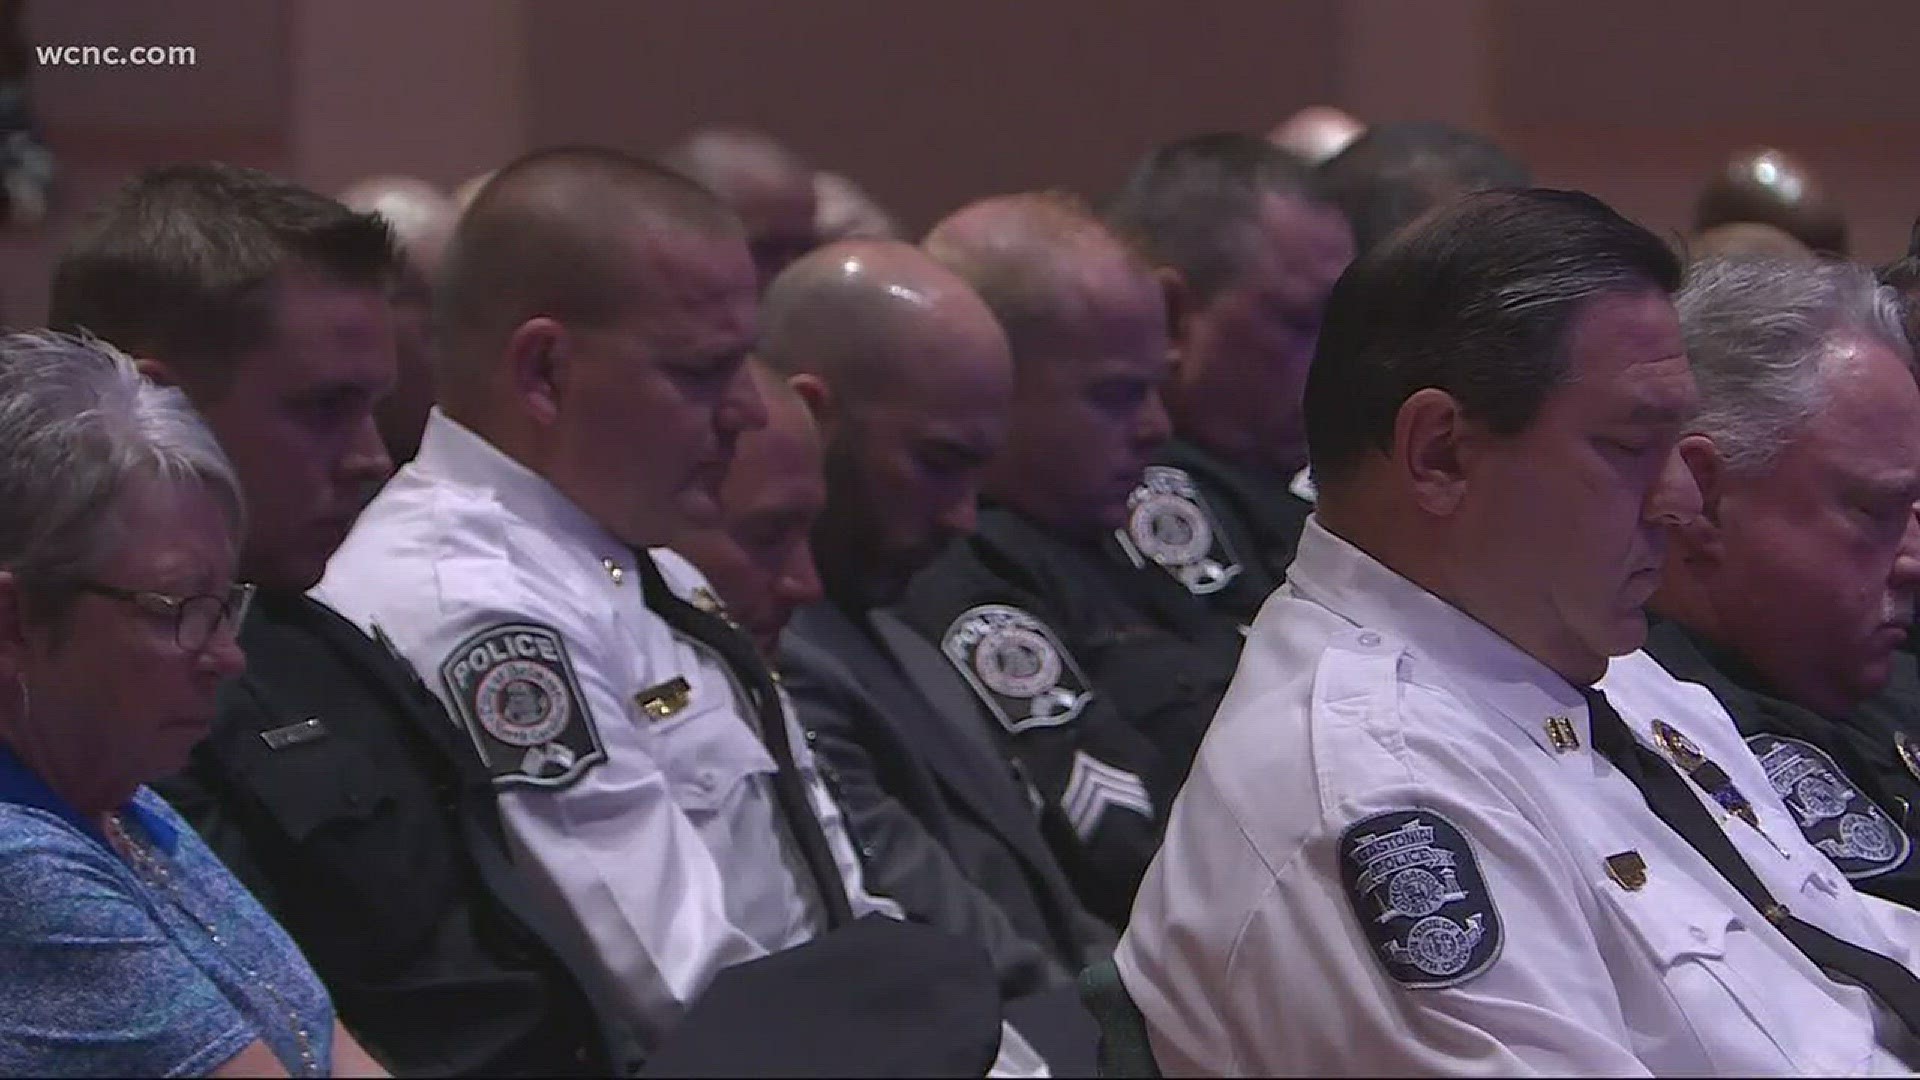 Dozens of officers from agencies across Gaston County came together for their annual "Law Enforcement Memorial Service."